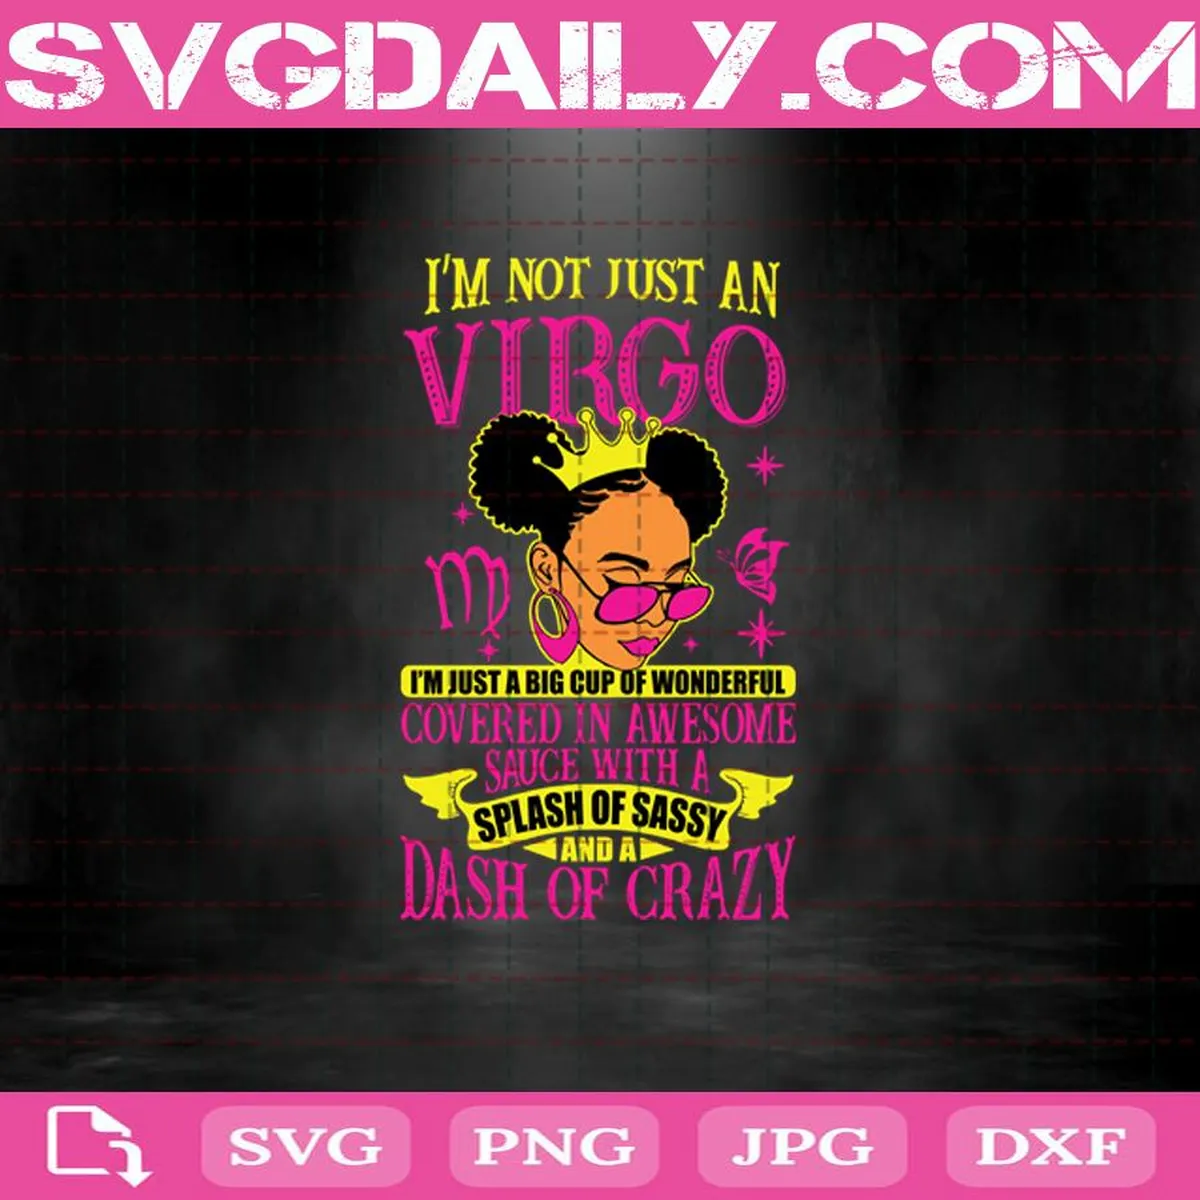 I’m Not Just An Virgo I’m Just A Big Cup Of Wonderful Covered In Awesome Sauce With A Splash Of Sassy And A Dash Of Crazy Svg, Virgo Svg